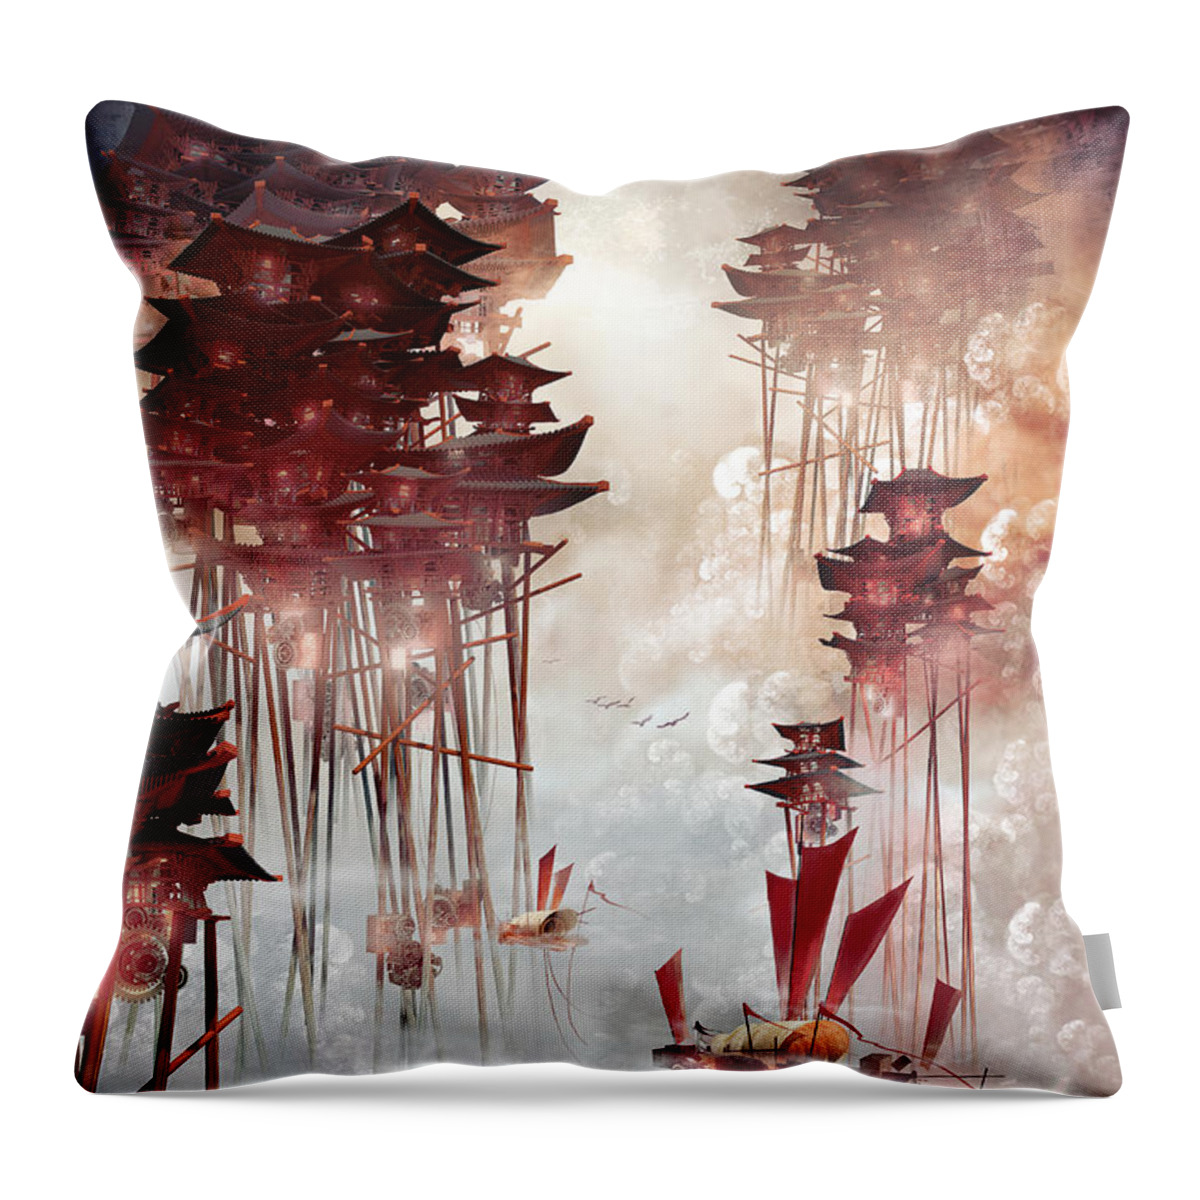 Landscape Throw Pillow featuring the digital art Moon Palace by Te Hu